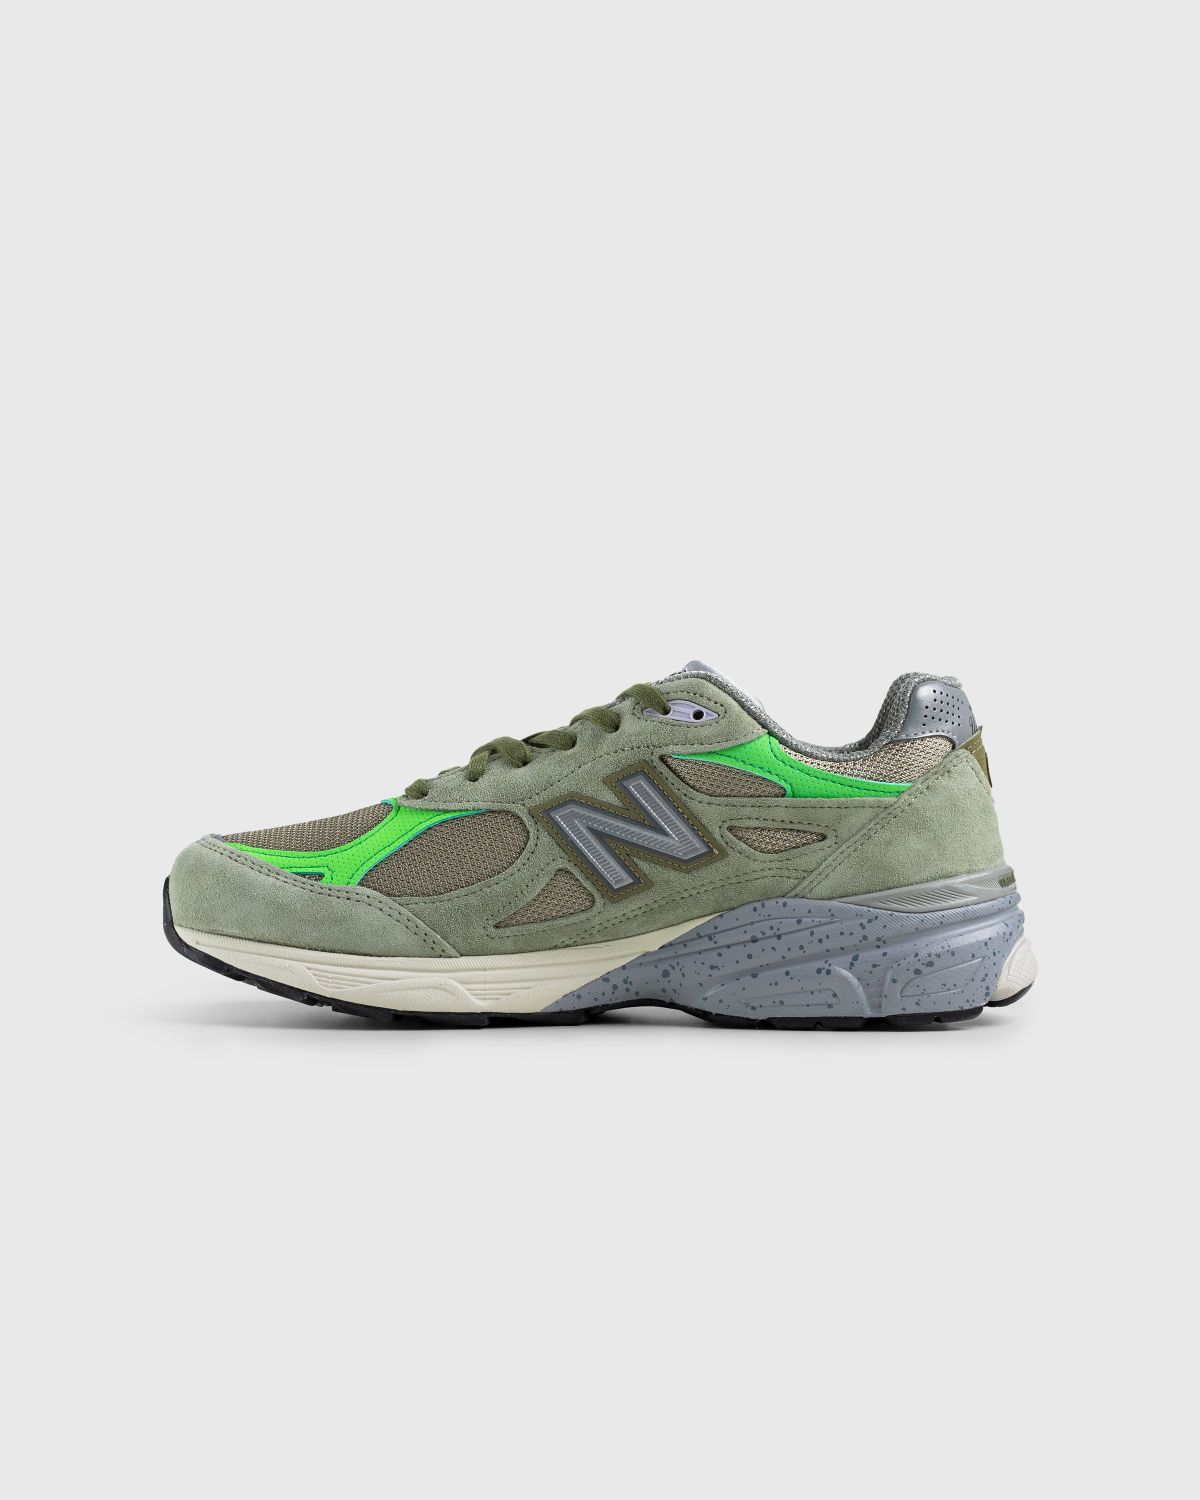 Patta x New Balance – M990PP3 Made in USA 990v3 Olive/White Pepper - Sneakers - Green - Image 3